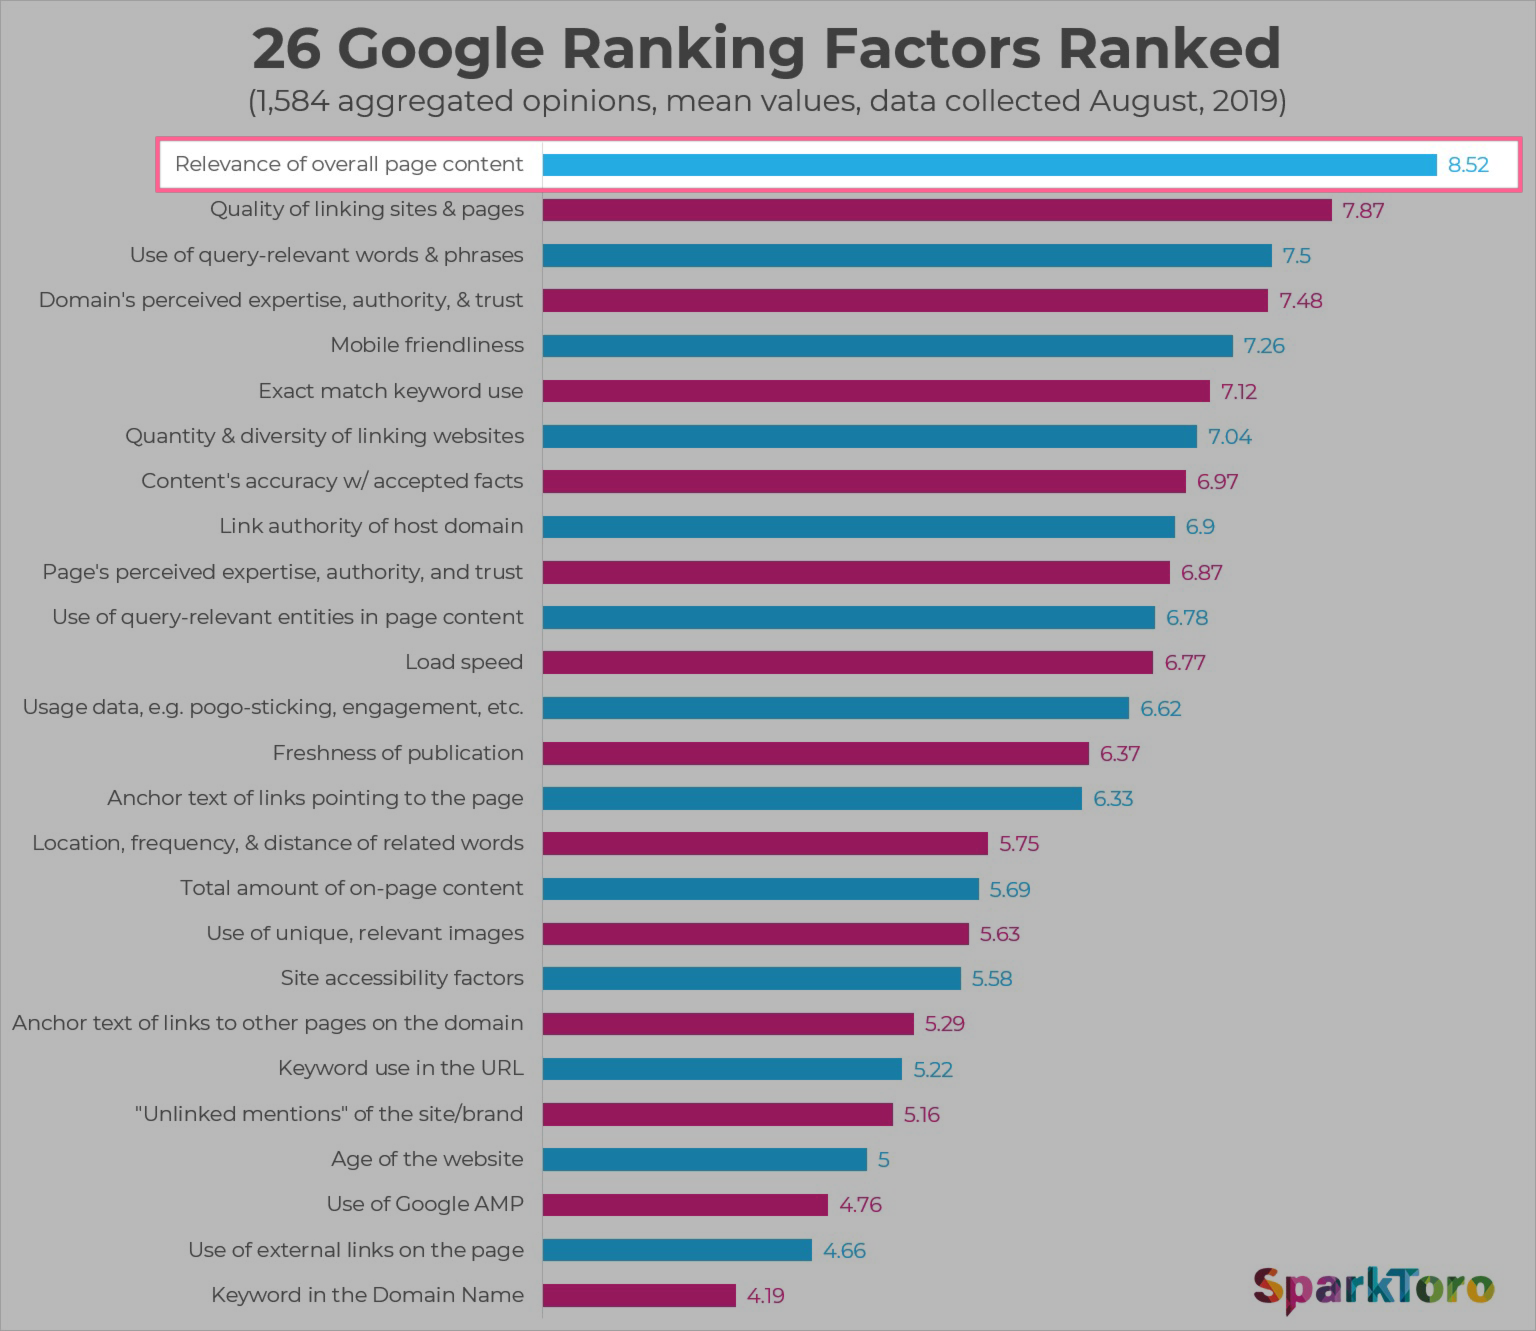 relevance the most important ranking factor